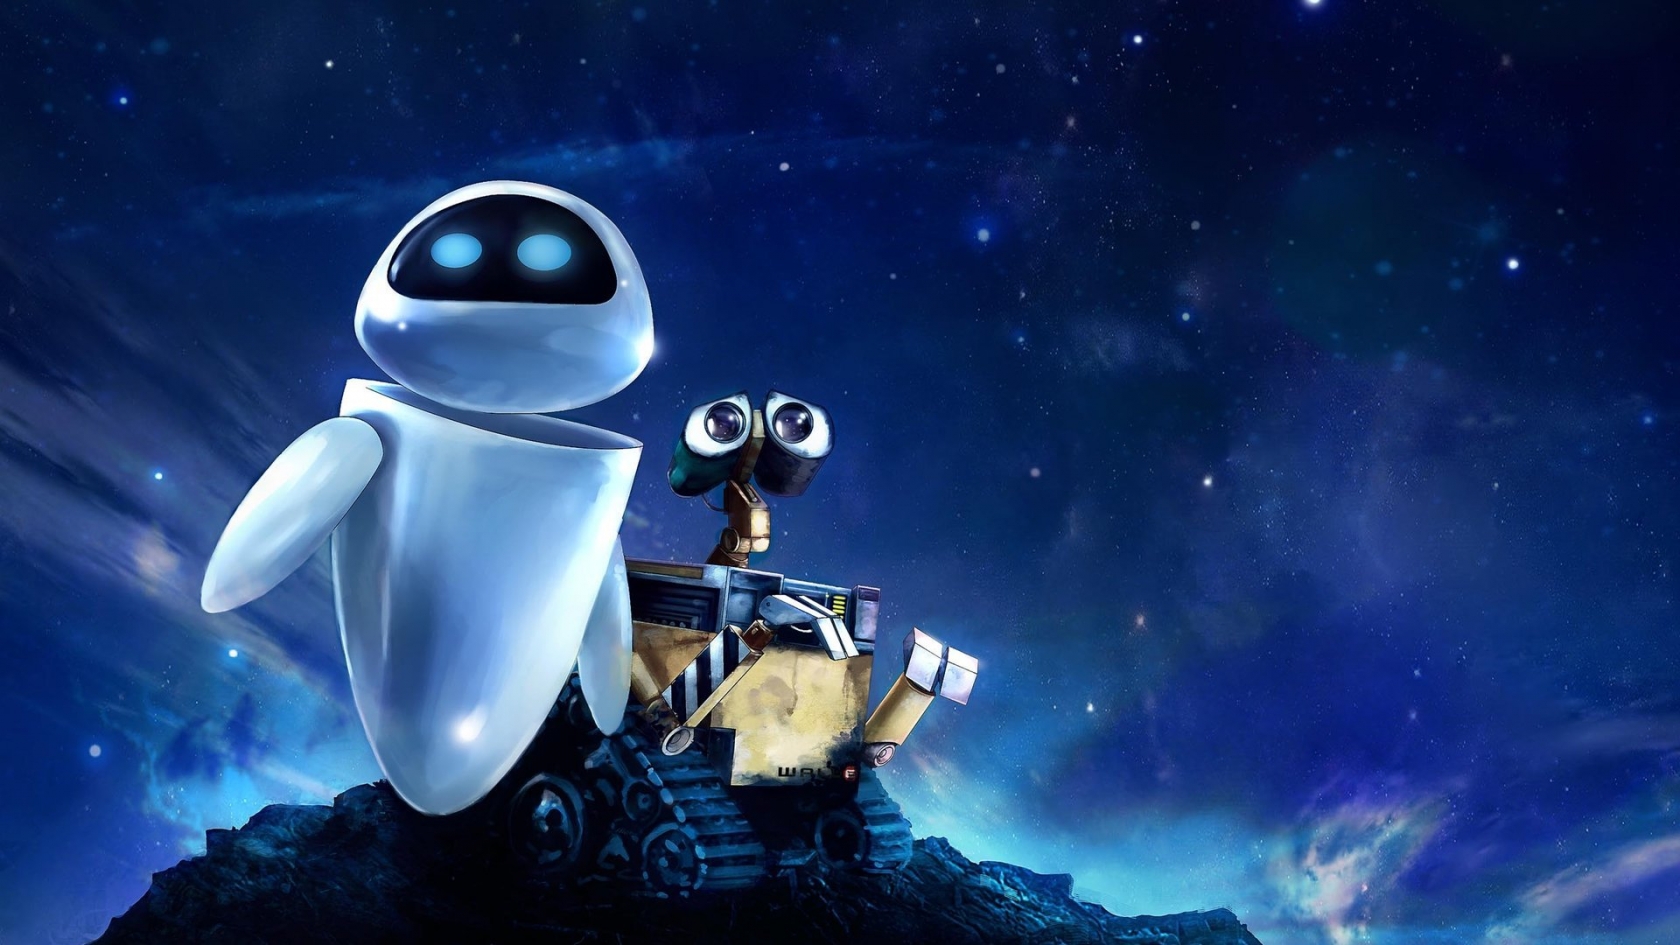 Walle Movie for 1680 x 945 HDTV resolution